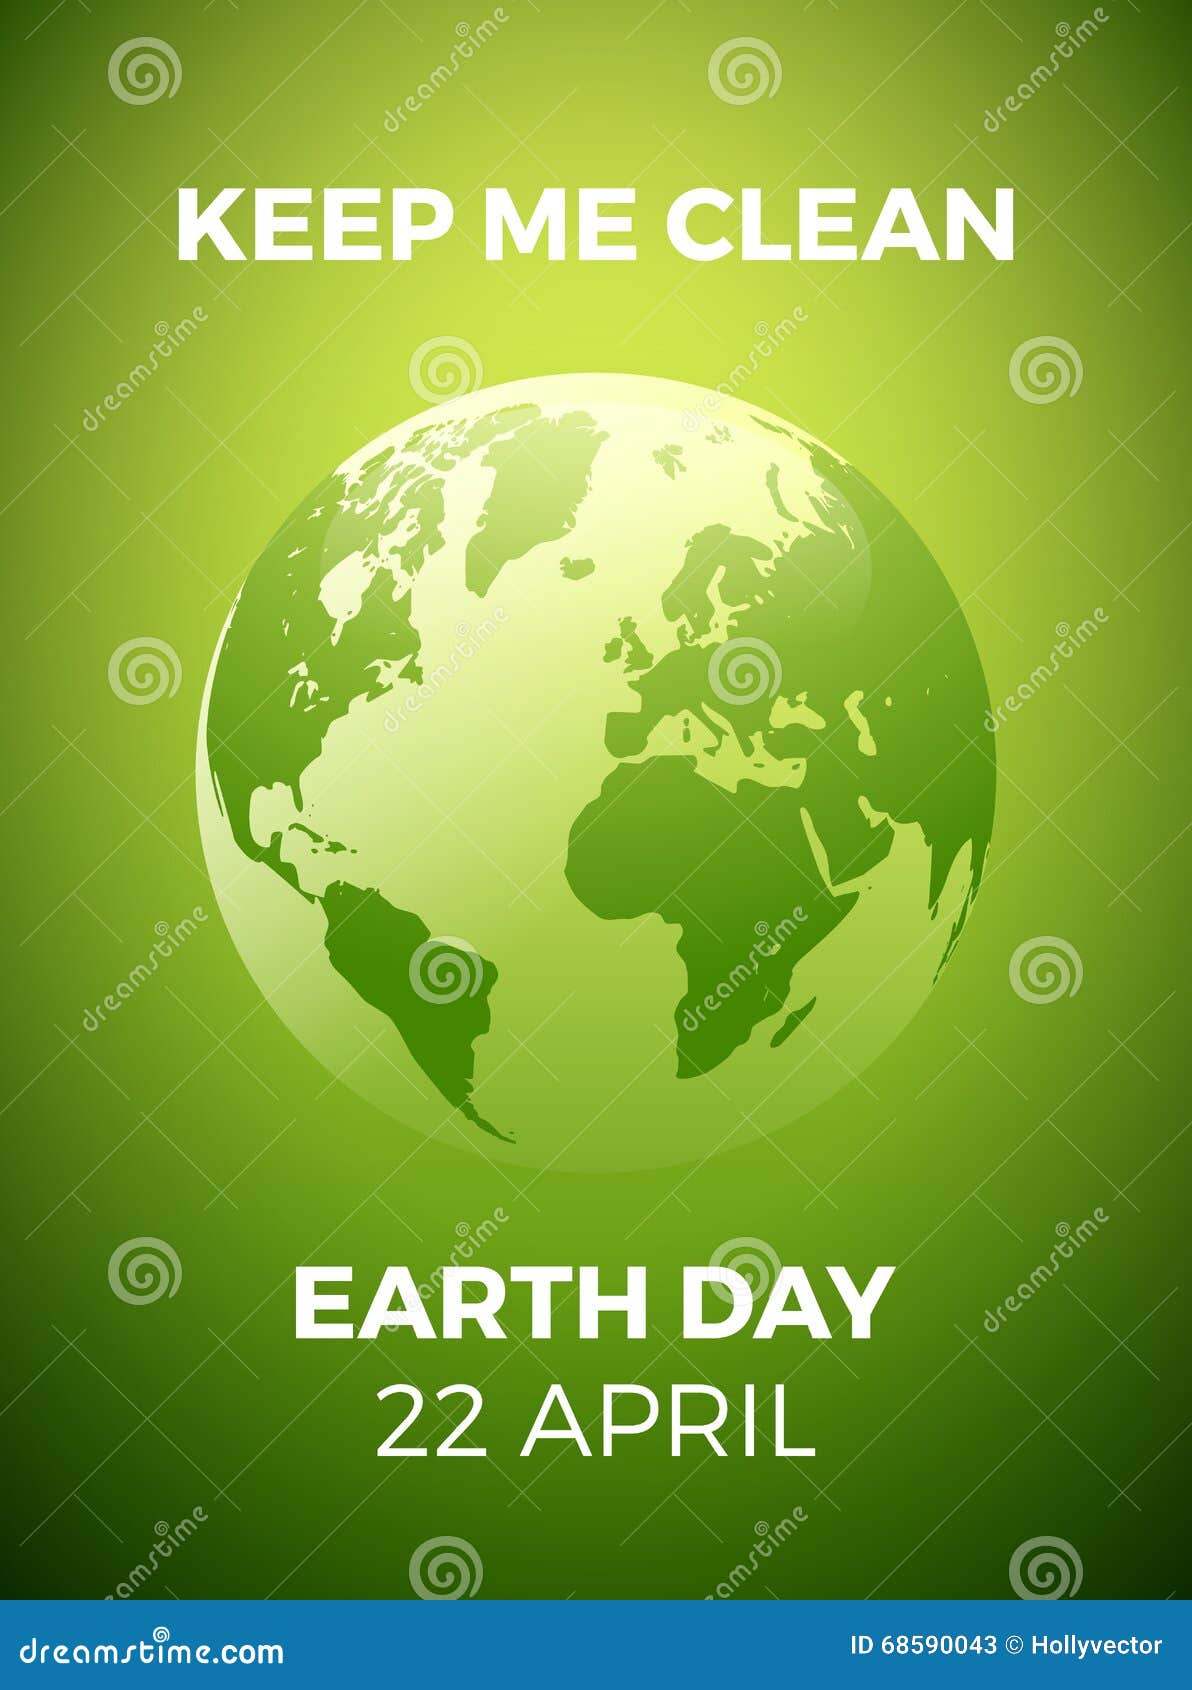 free clipart earth day april 22 - photo #14